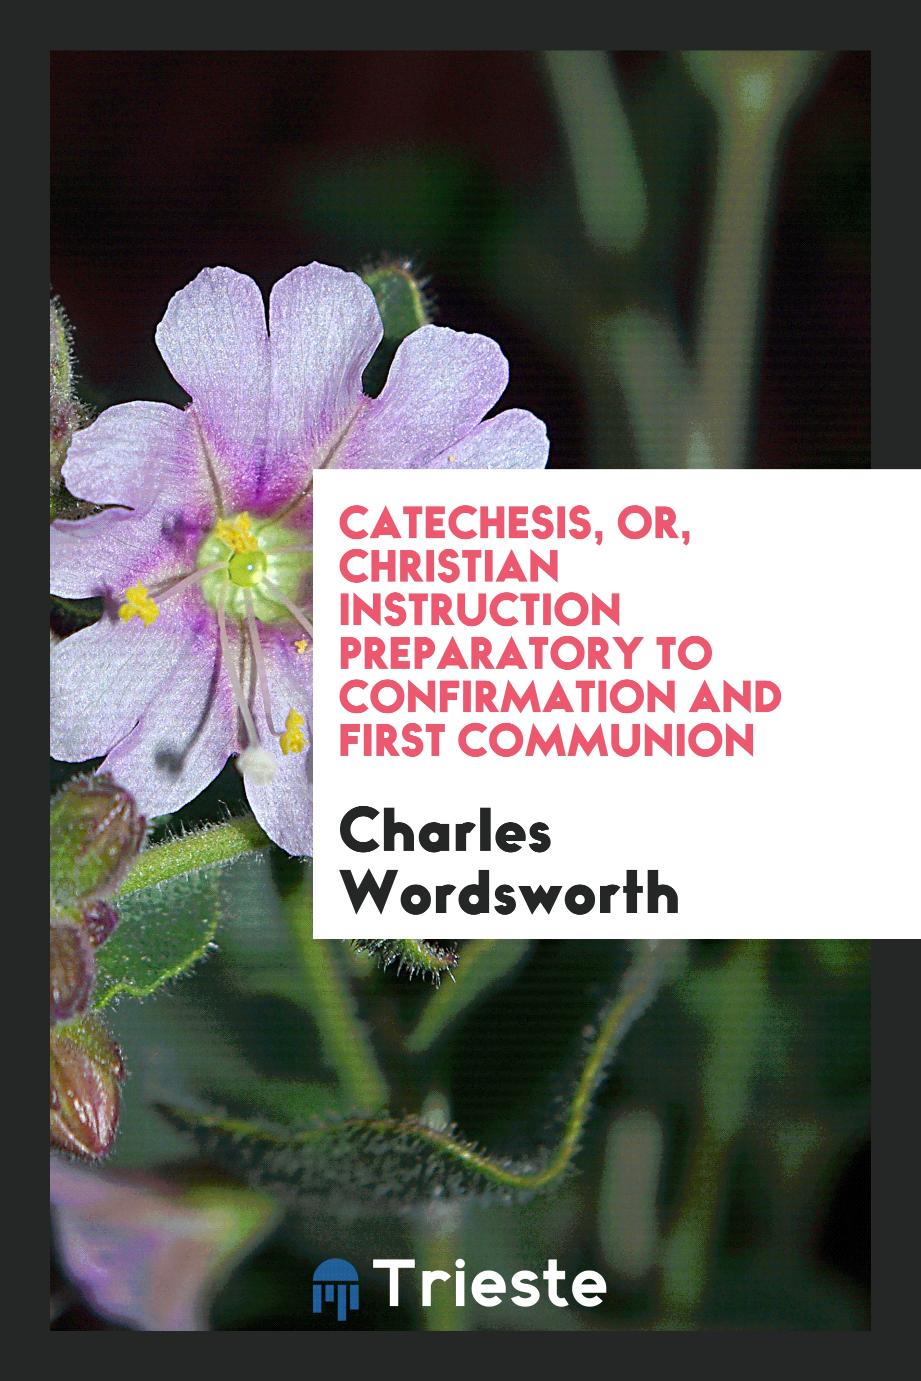 Catechesis, or, Christian instruction preparatory to confirmation and first communion